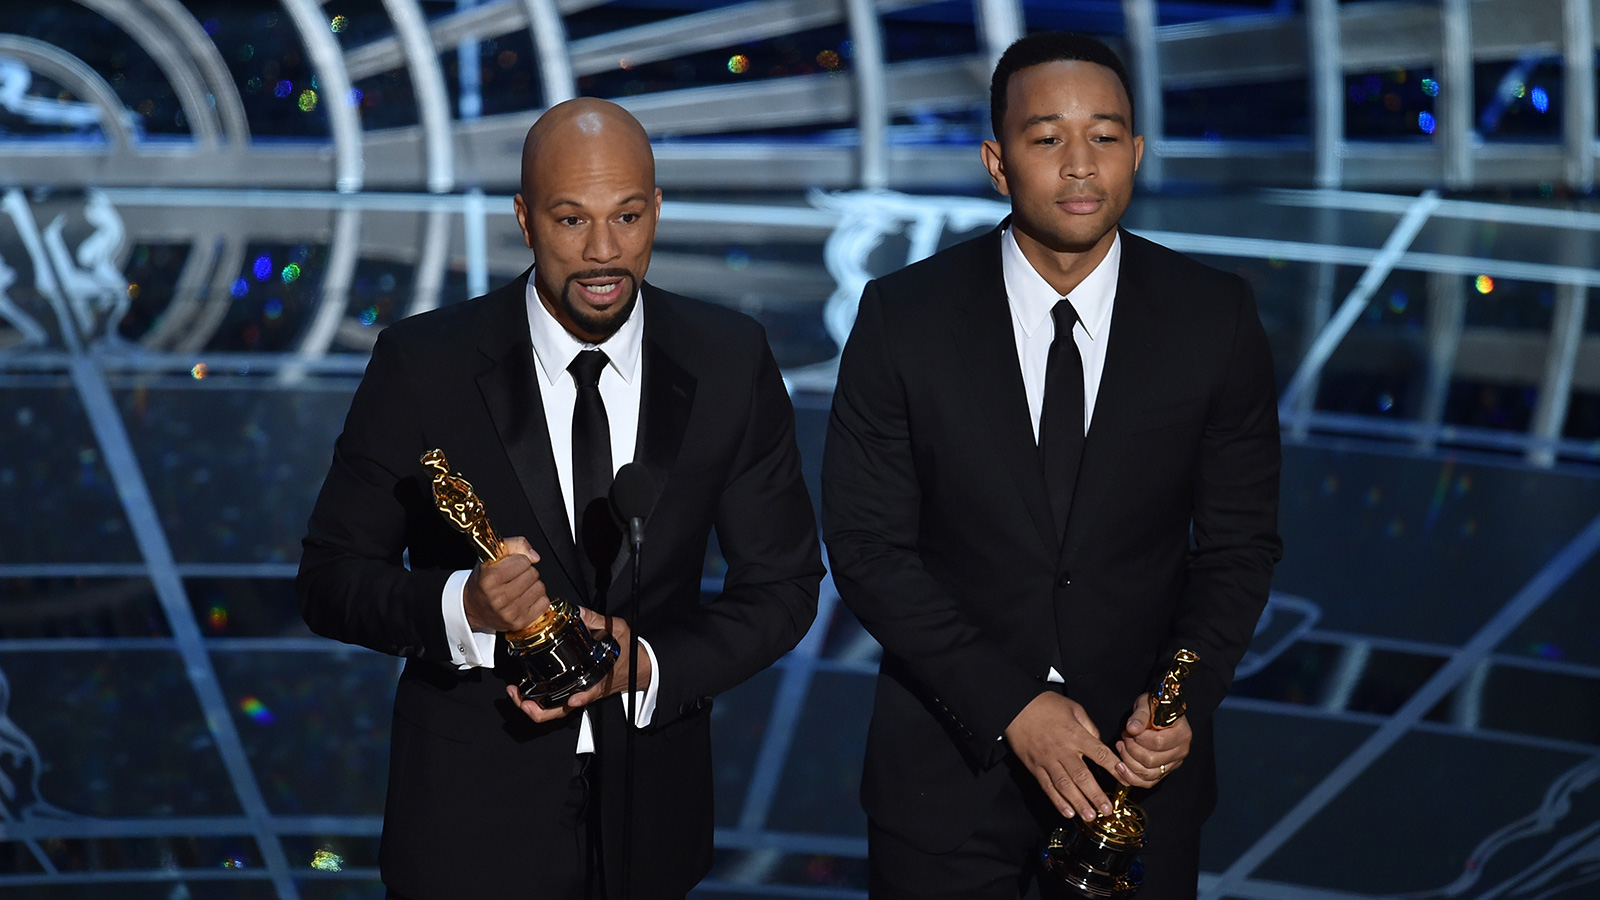 Common and John Legend accept the Best Original Song Award for "Glory" from "Selma" onstage during the 87th Annual Academy Awards in 2015.